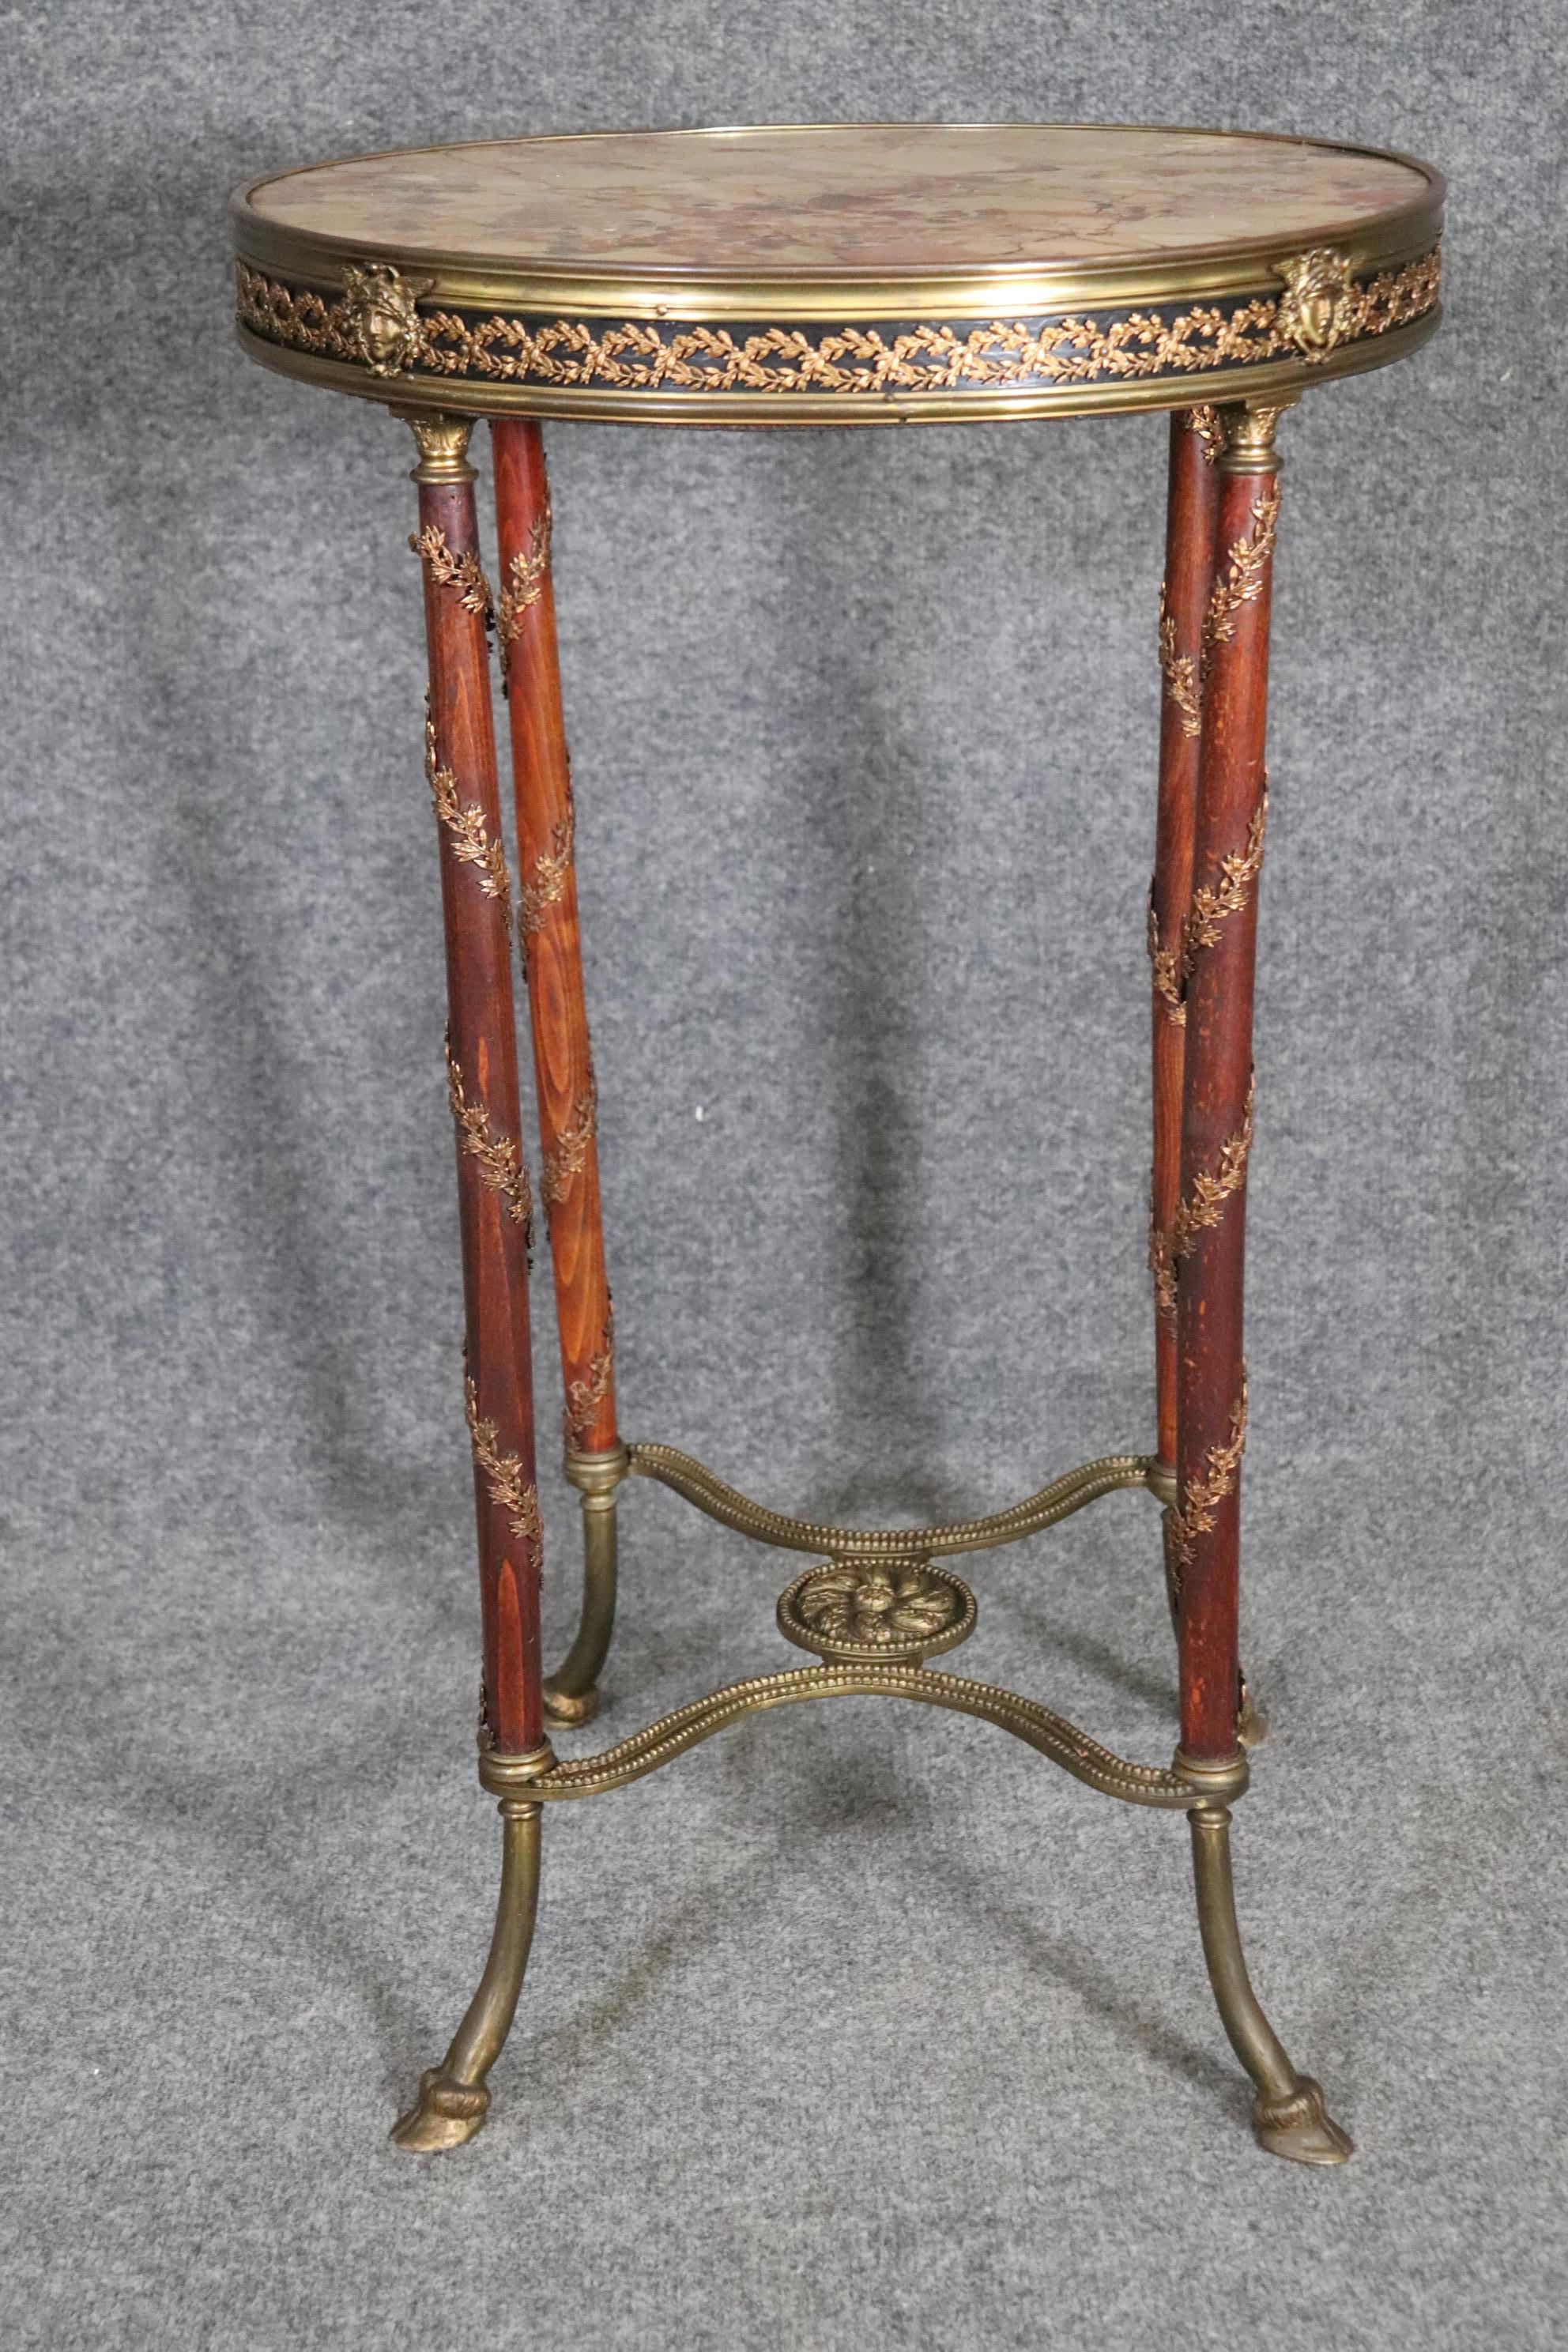 Early 20th Century Fine Adam Weisweiler Style Bronze Mounted Breche d' Alep Marble Top Table For Sale